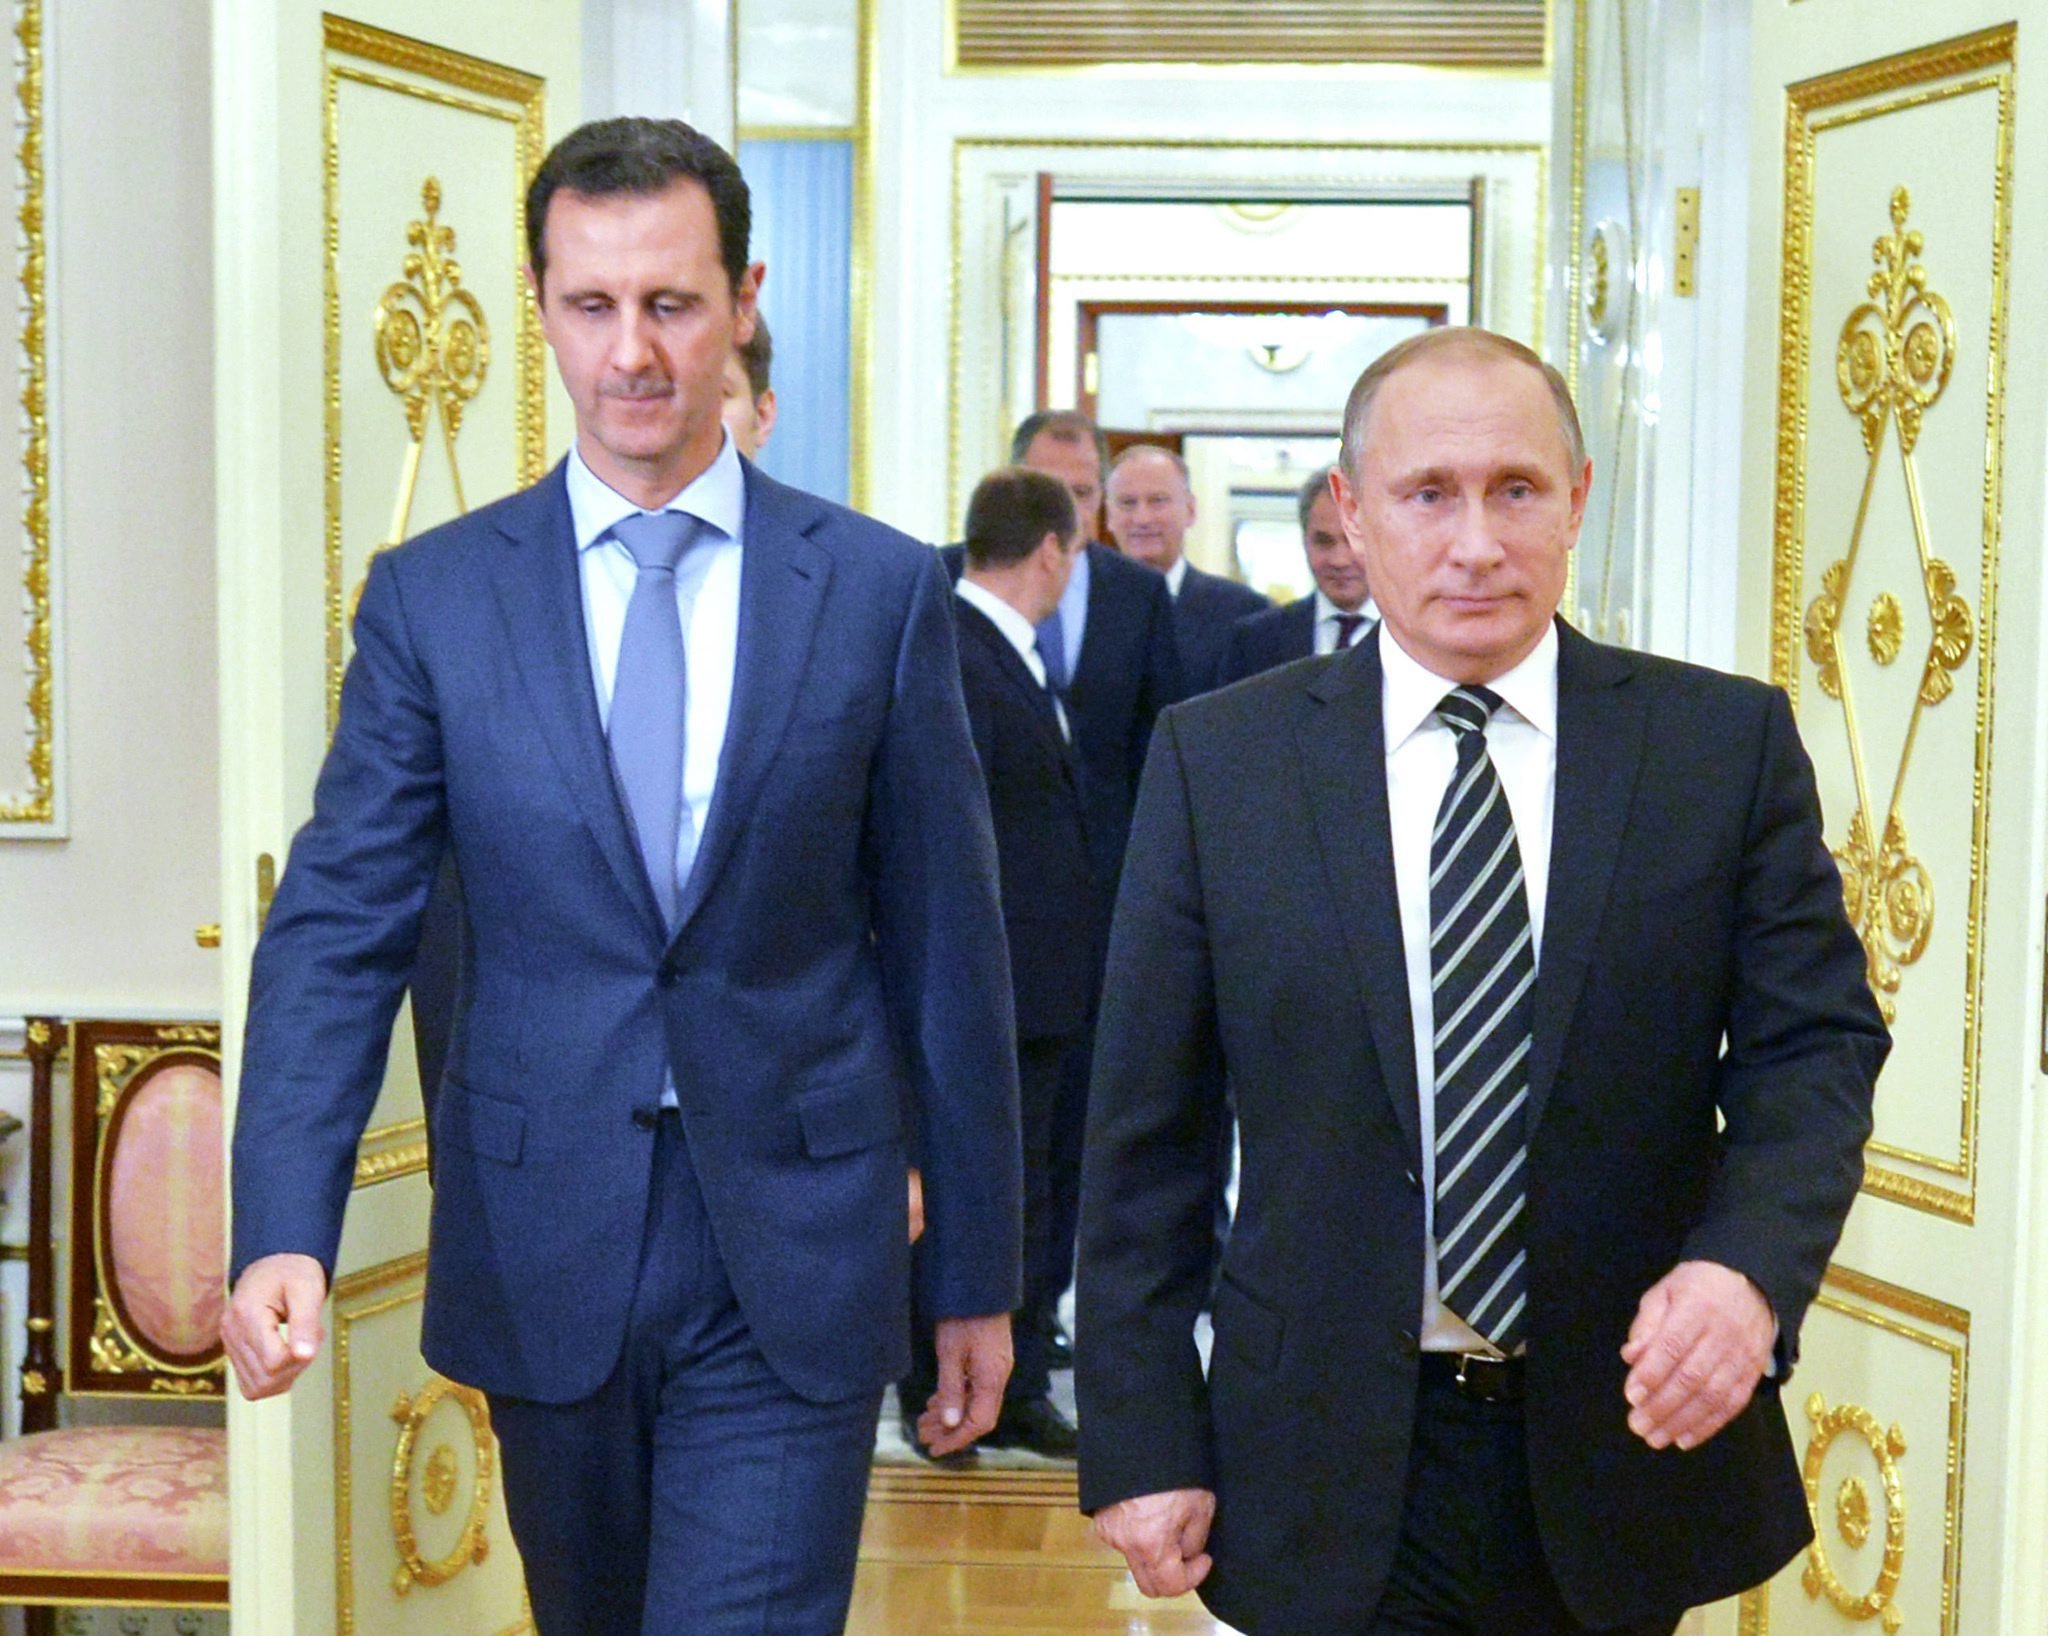 epa04986383 A picture made available on 21 October 2015 shows Russian President Vladimir Putin (R) and Syrian President Bashar al-Assad entering a hall during their meeting at the Kremlin in Moscow, Russia, 20 October 2015. Beleaguered Syrian President Bashar al-Assad travelled to Moscow for talks with his Russian counterpart Vladimir Putin, the Kremlin revealed on 21 October 2015. Assad and Putin discussed the situation in war-torn Syria on 20 October 2015 evening during the talks that had not been made public in advance, the Kremlin spokesman said. The talks dealt with the 'fight against terrorist extremist groups' and with Russian air support for attacks by Syrian troops on the ground. Russia has been carrying out airstrikes in Syria since the end of September. Moscow has declared the so-called Islamic State (IS or ISIS) as the main enemy, but Western nations have accused Moscow of attacking other groups opposed to the Assad regime. EPA/ALEXEY DRUZHINYN/RIA NOVOSTI/POOL ALTERNATIVE 